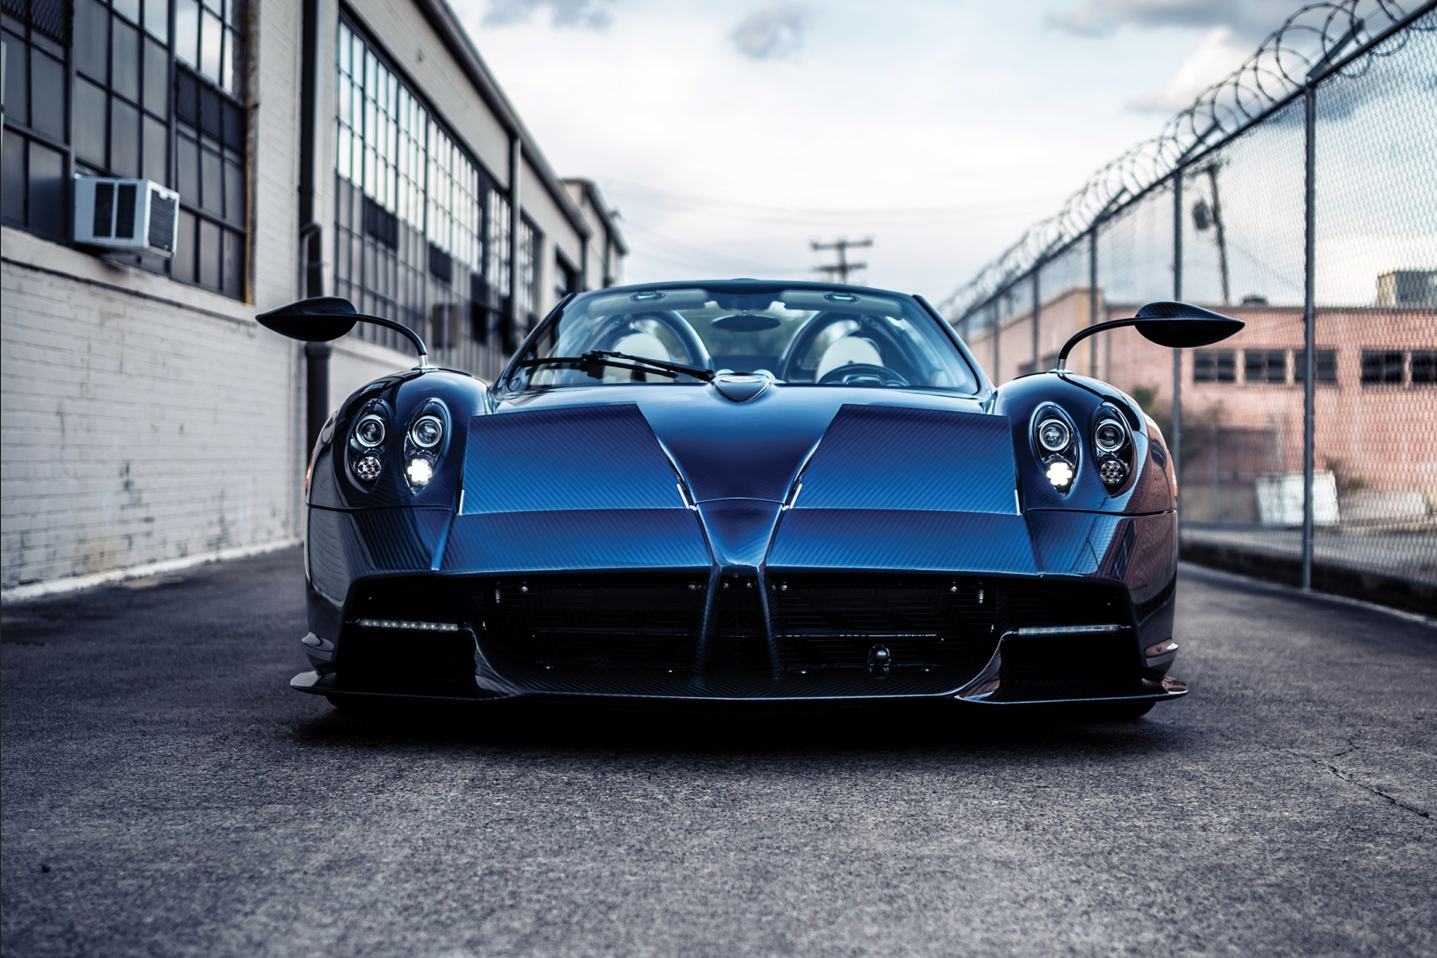 https://www.premierfinancialservices.com/wp-content/uploads/2020/02/2018-Pagani-Huayra-Roadster-front-outside-1.png